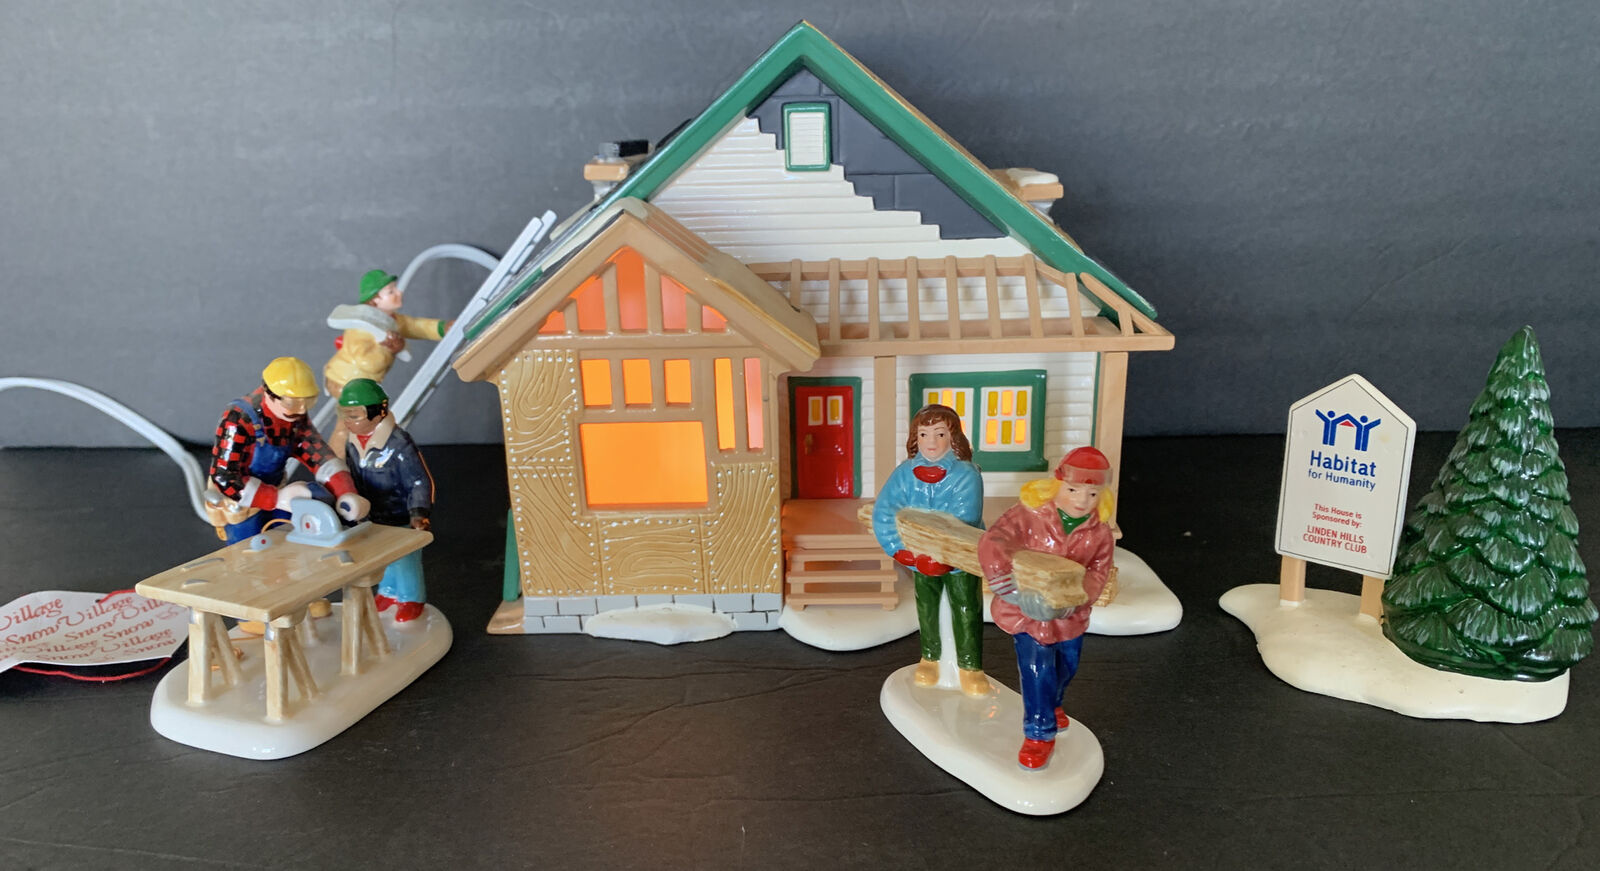 Dept 56 Snow Village Habitat For Humanity A Home In The Making Set of 5 Boxed